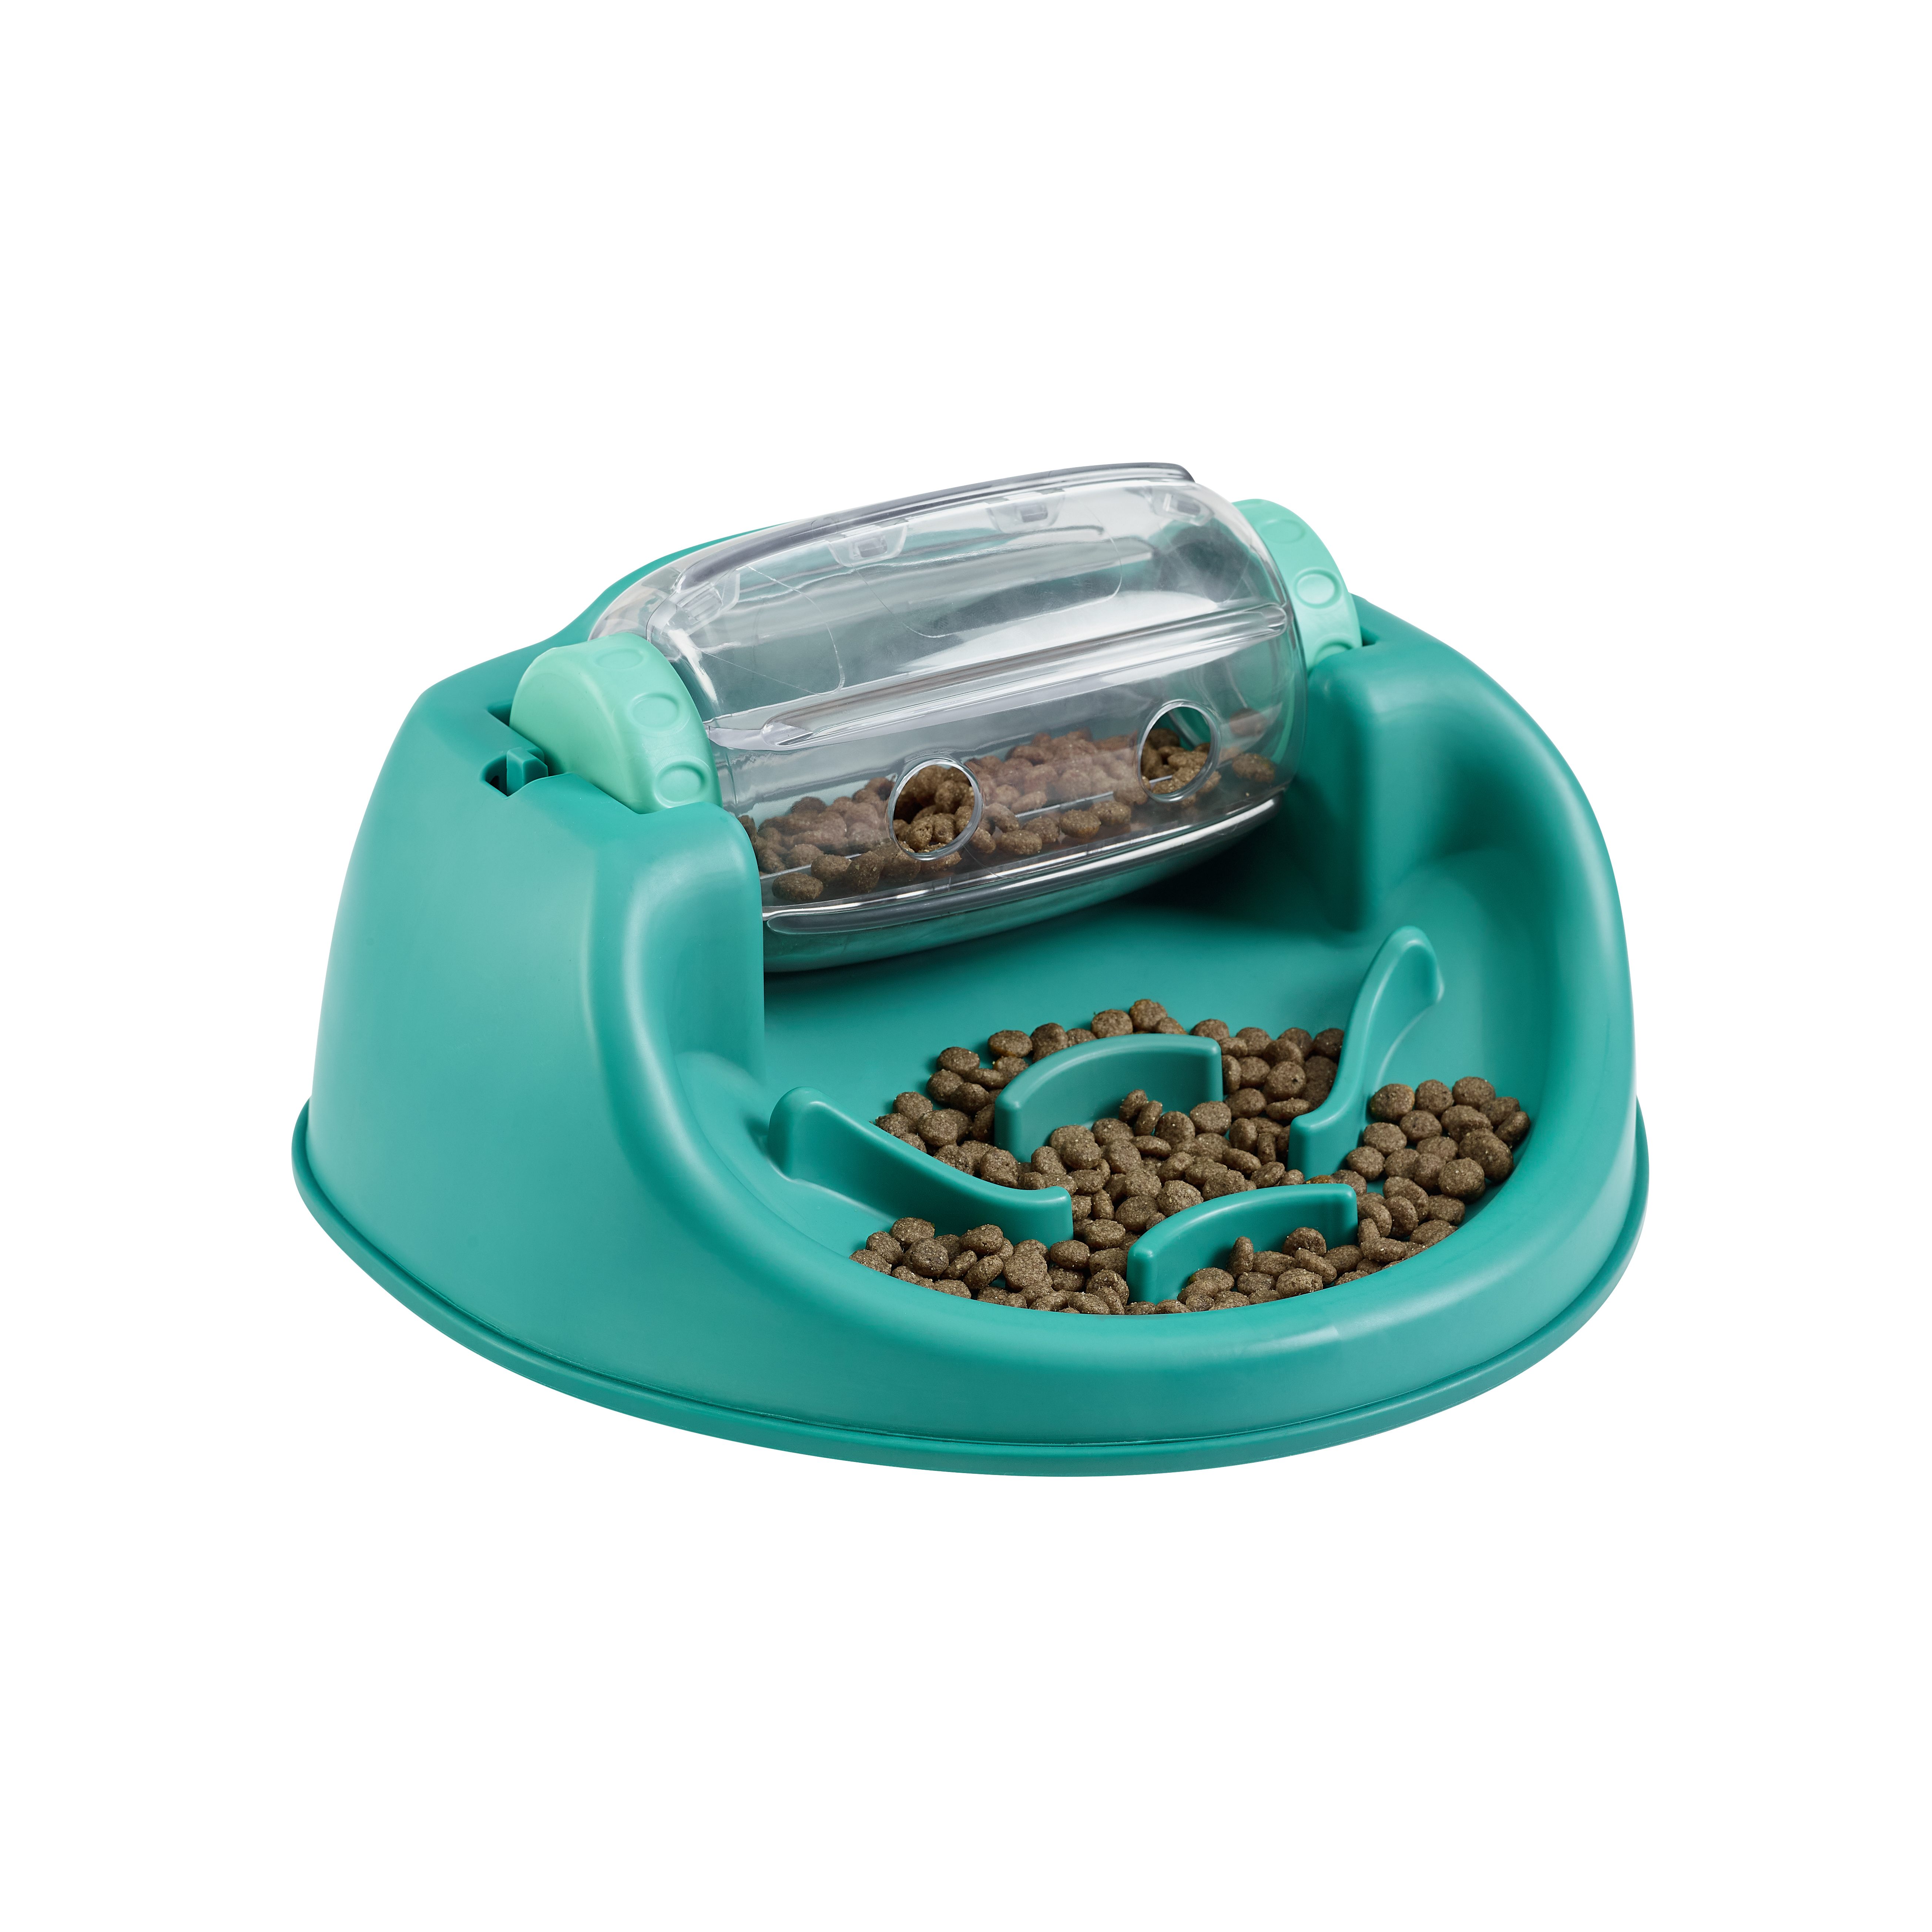 Slow Your Dog Down with the Trot Puzzle Feeder